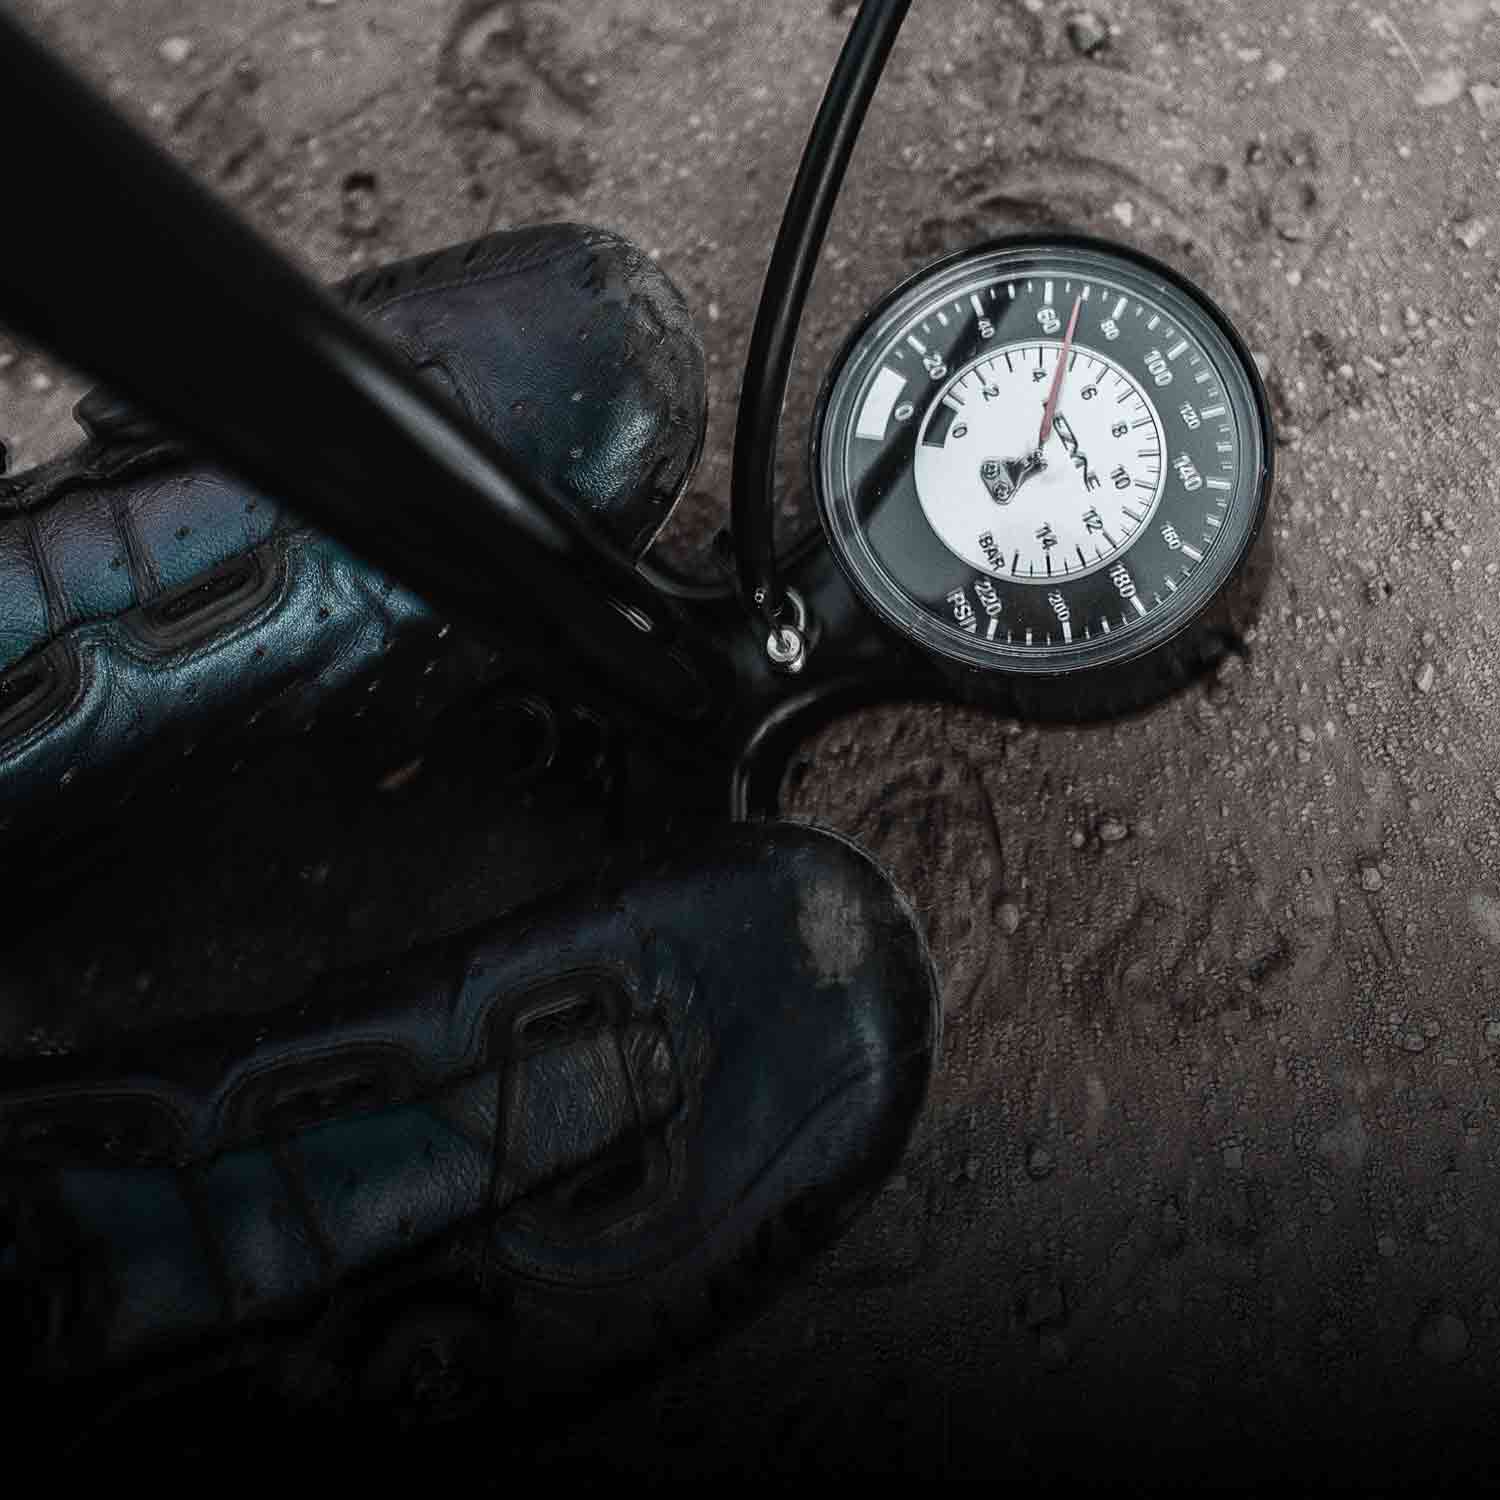 Someones feet on the base of a bicycle floor pump with an analog pressure gage. 